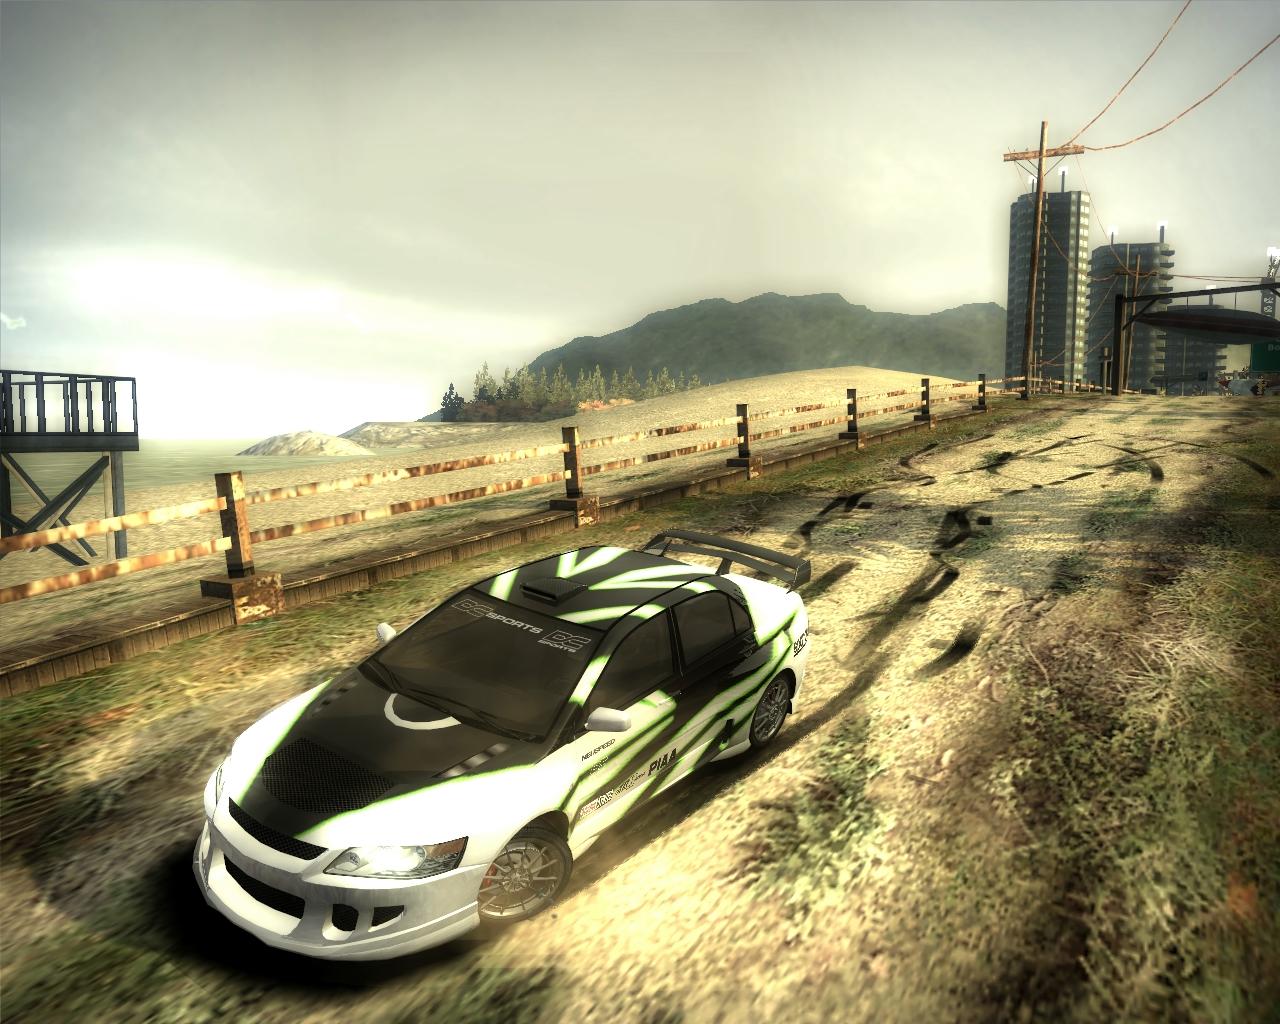 Игры nfs mw. NFS most wanted. NFS MW 2005. Нид фор СПИД мост вантед 2005. Игра NFS most wanted 2005.